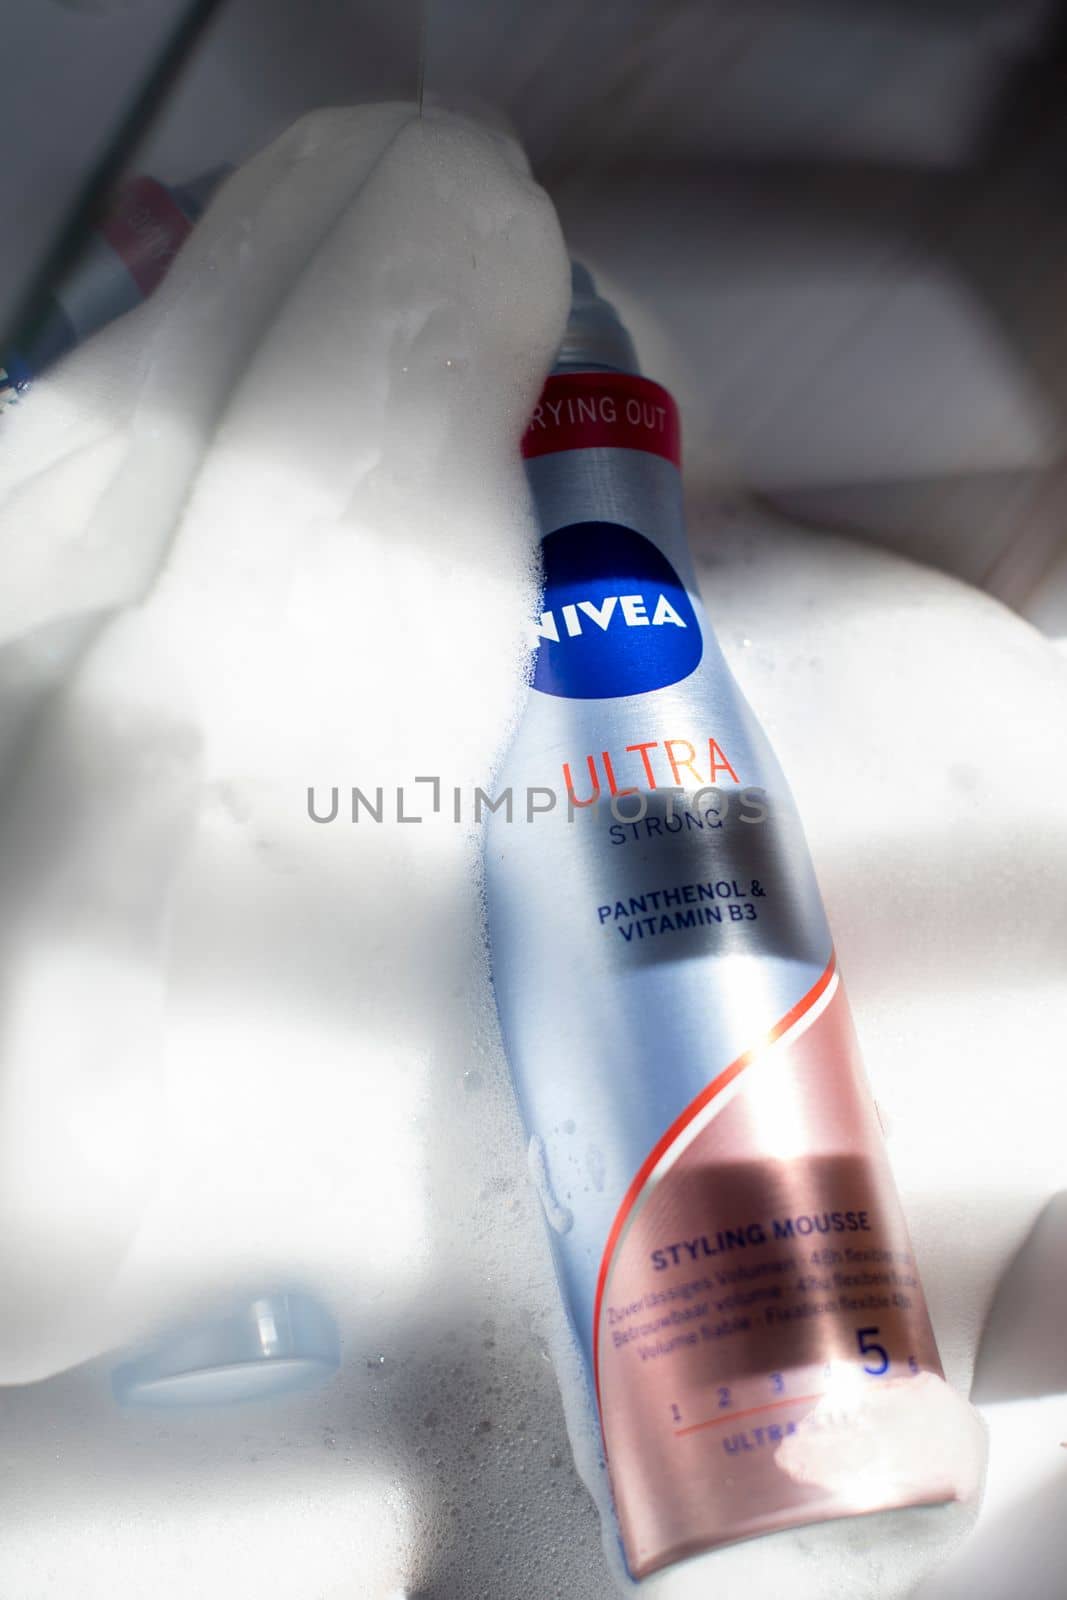 Nivea hair fixing ultra stong styling mousse in foam and sunshine, close-up photo of the product, As,Belgium, Juny 30, 2022, High quality photo,